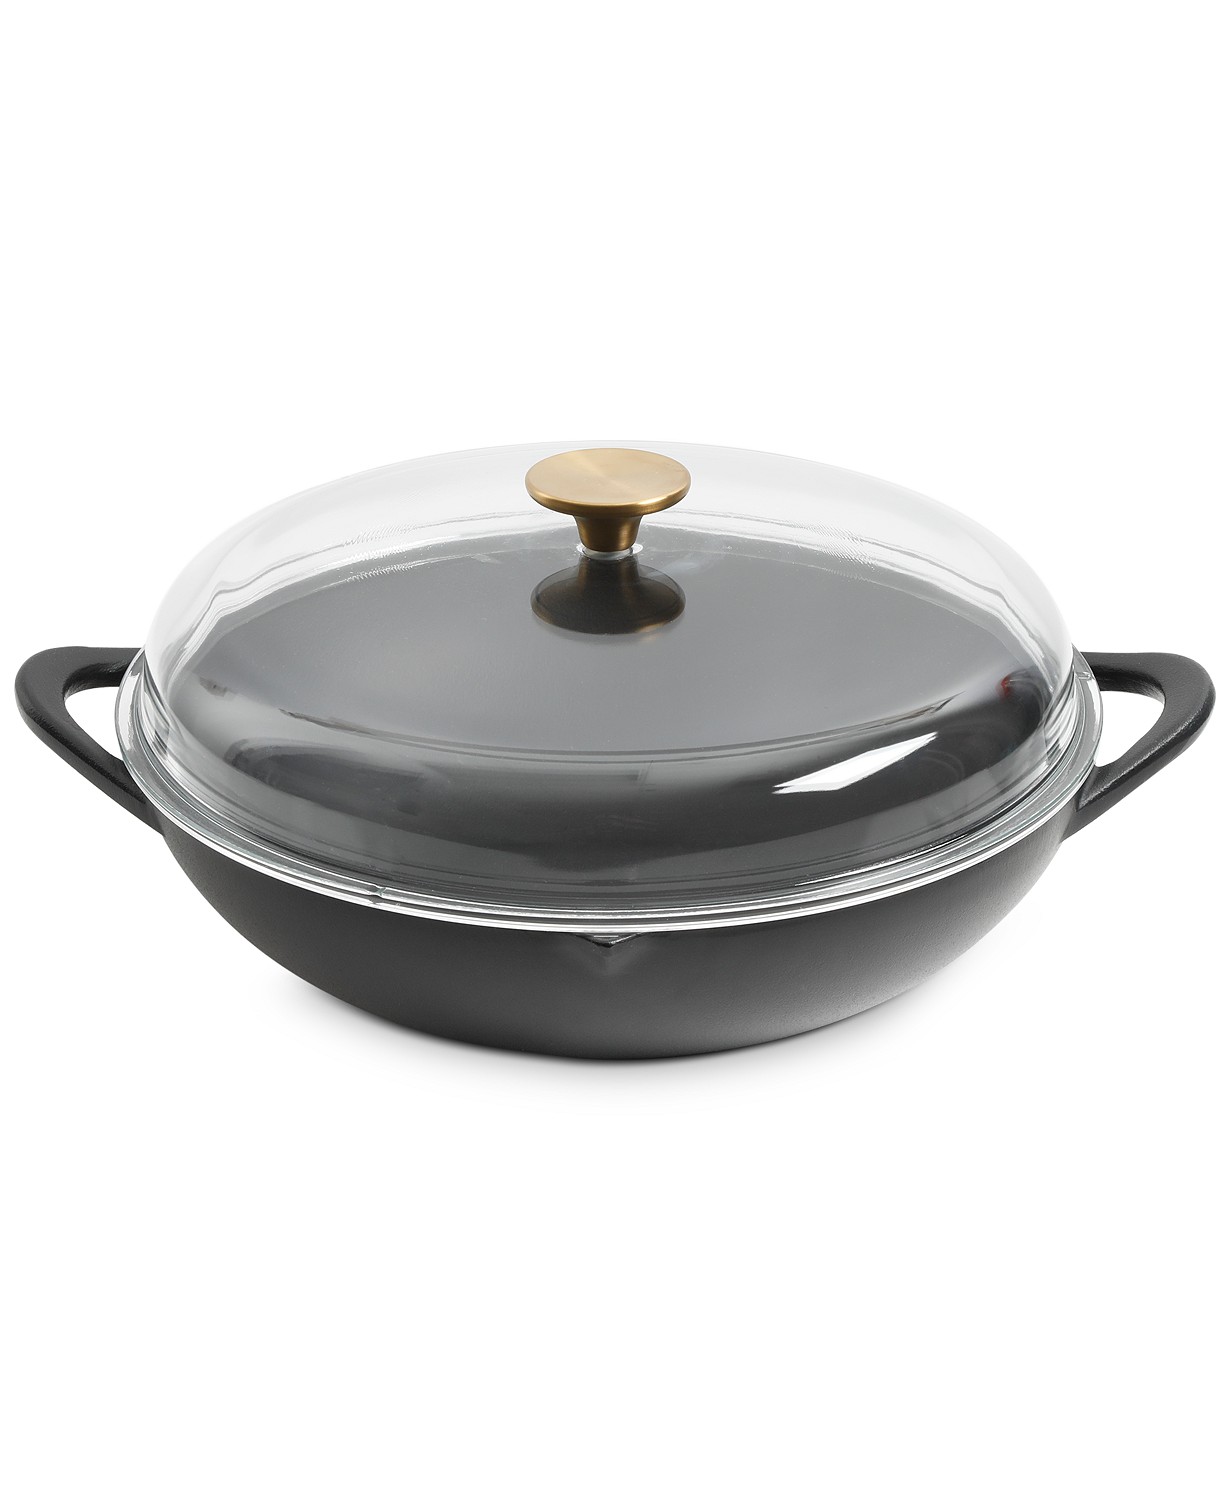 Pre-Seasoned Cast Iron 12.25" Everyday Pan with Glass Lid